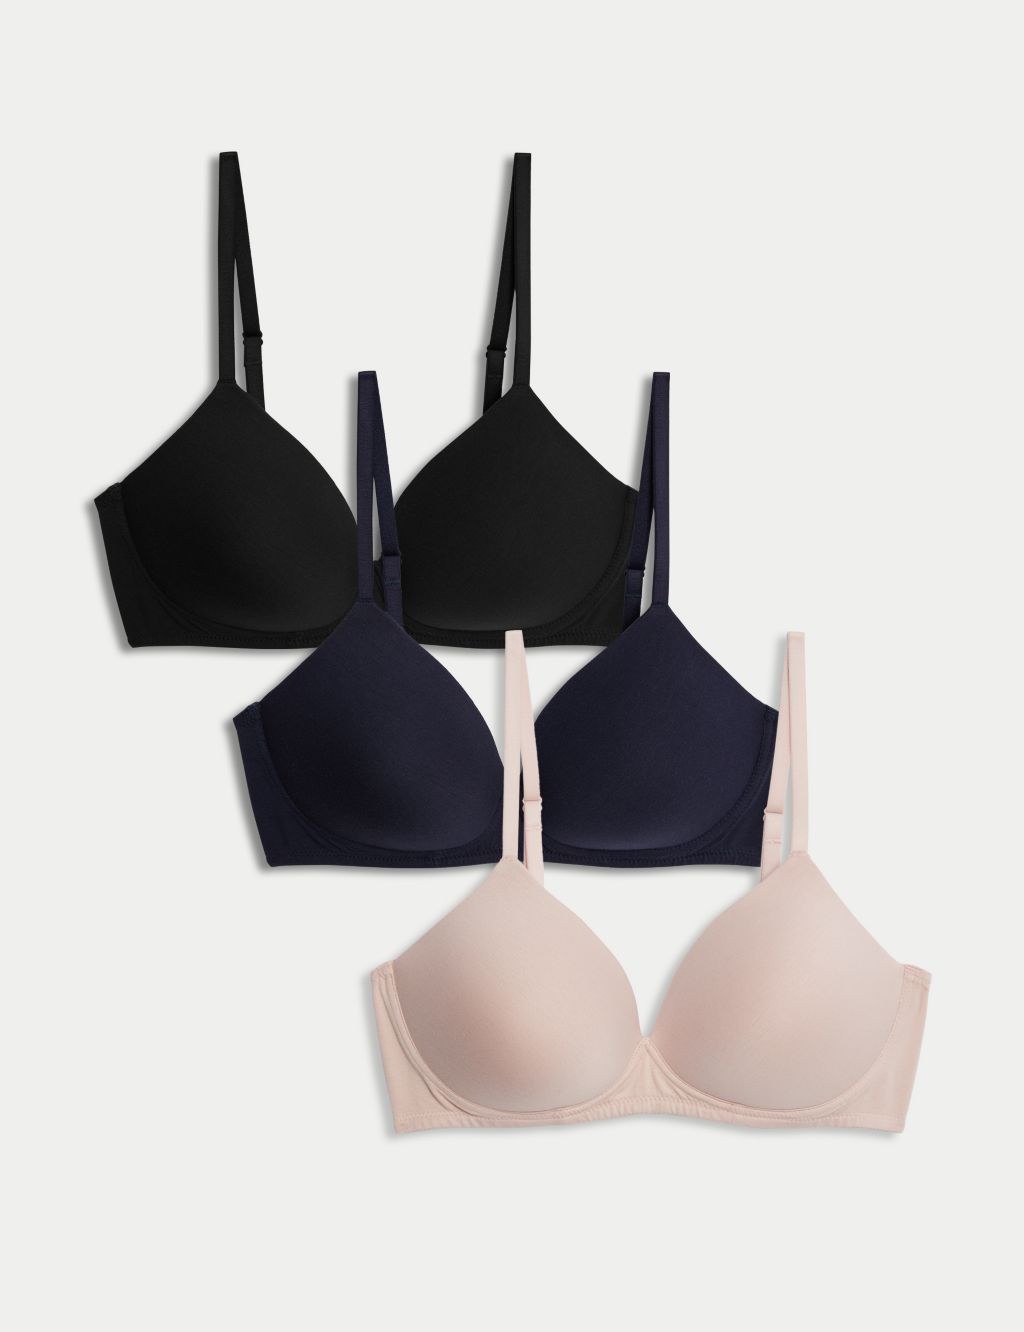 M&S - Neath - BRA FIT IS BACK 👙 Our bra fitting service is available to  you at Neath M&S on Saturdays 9am - 4:30pm and Sundays 11am - 2:30pm. Find  the